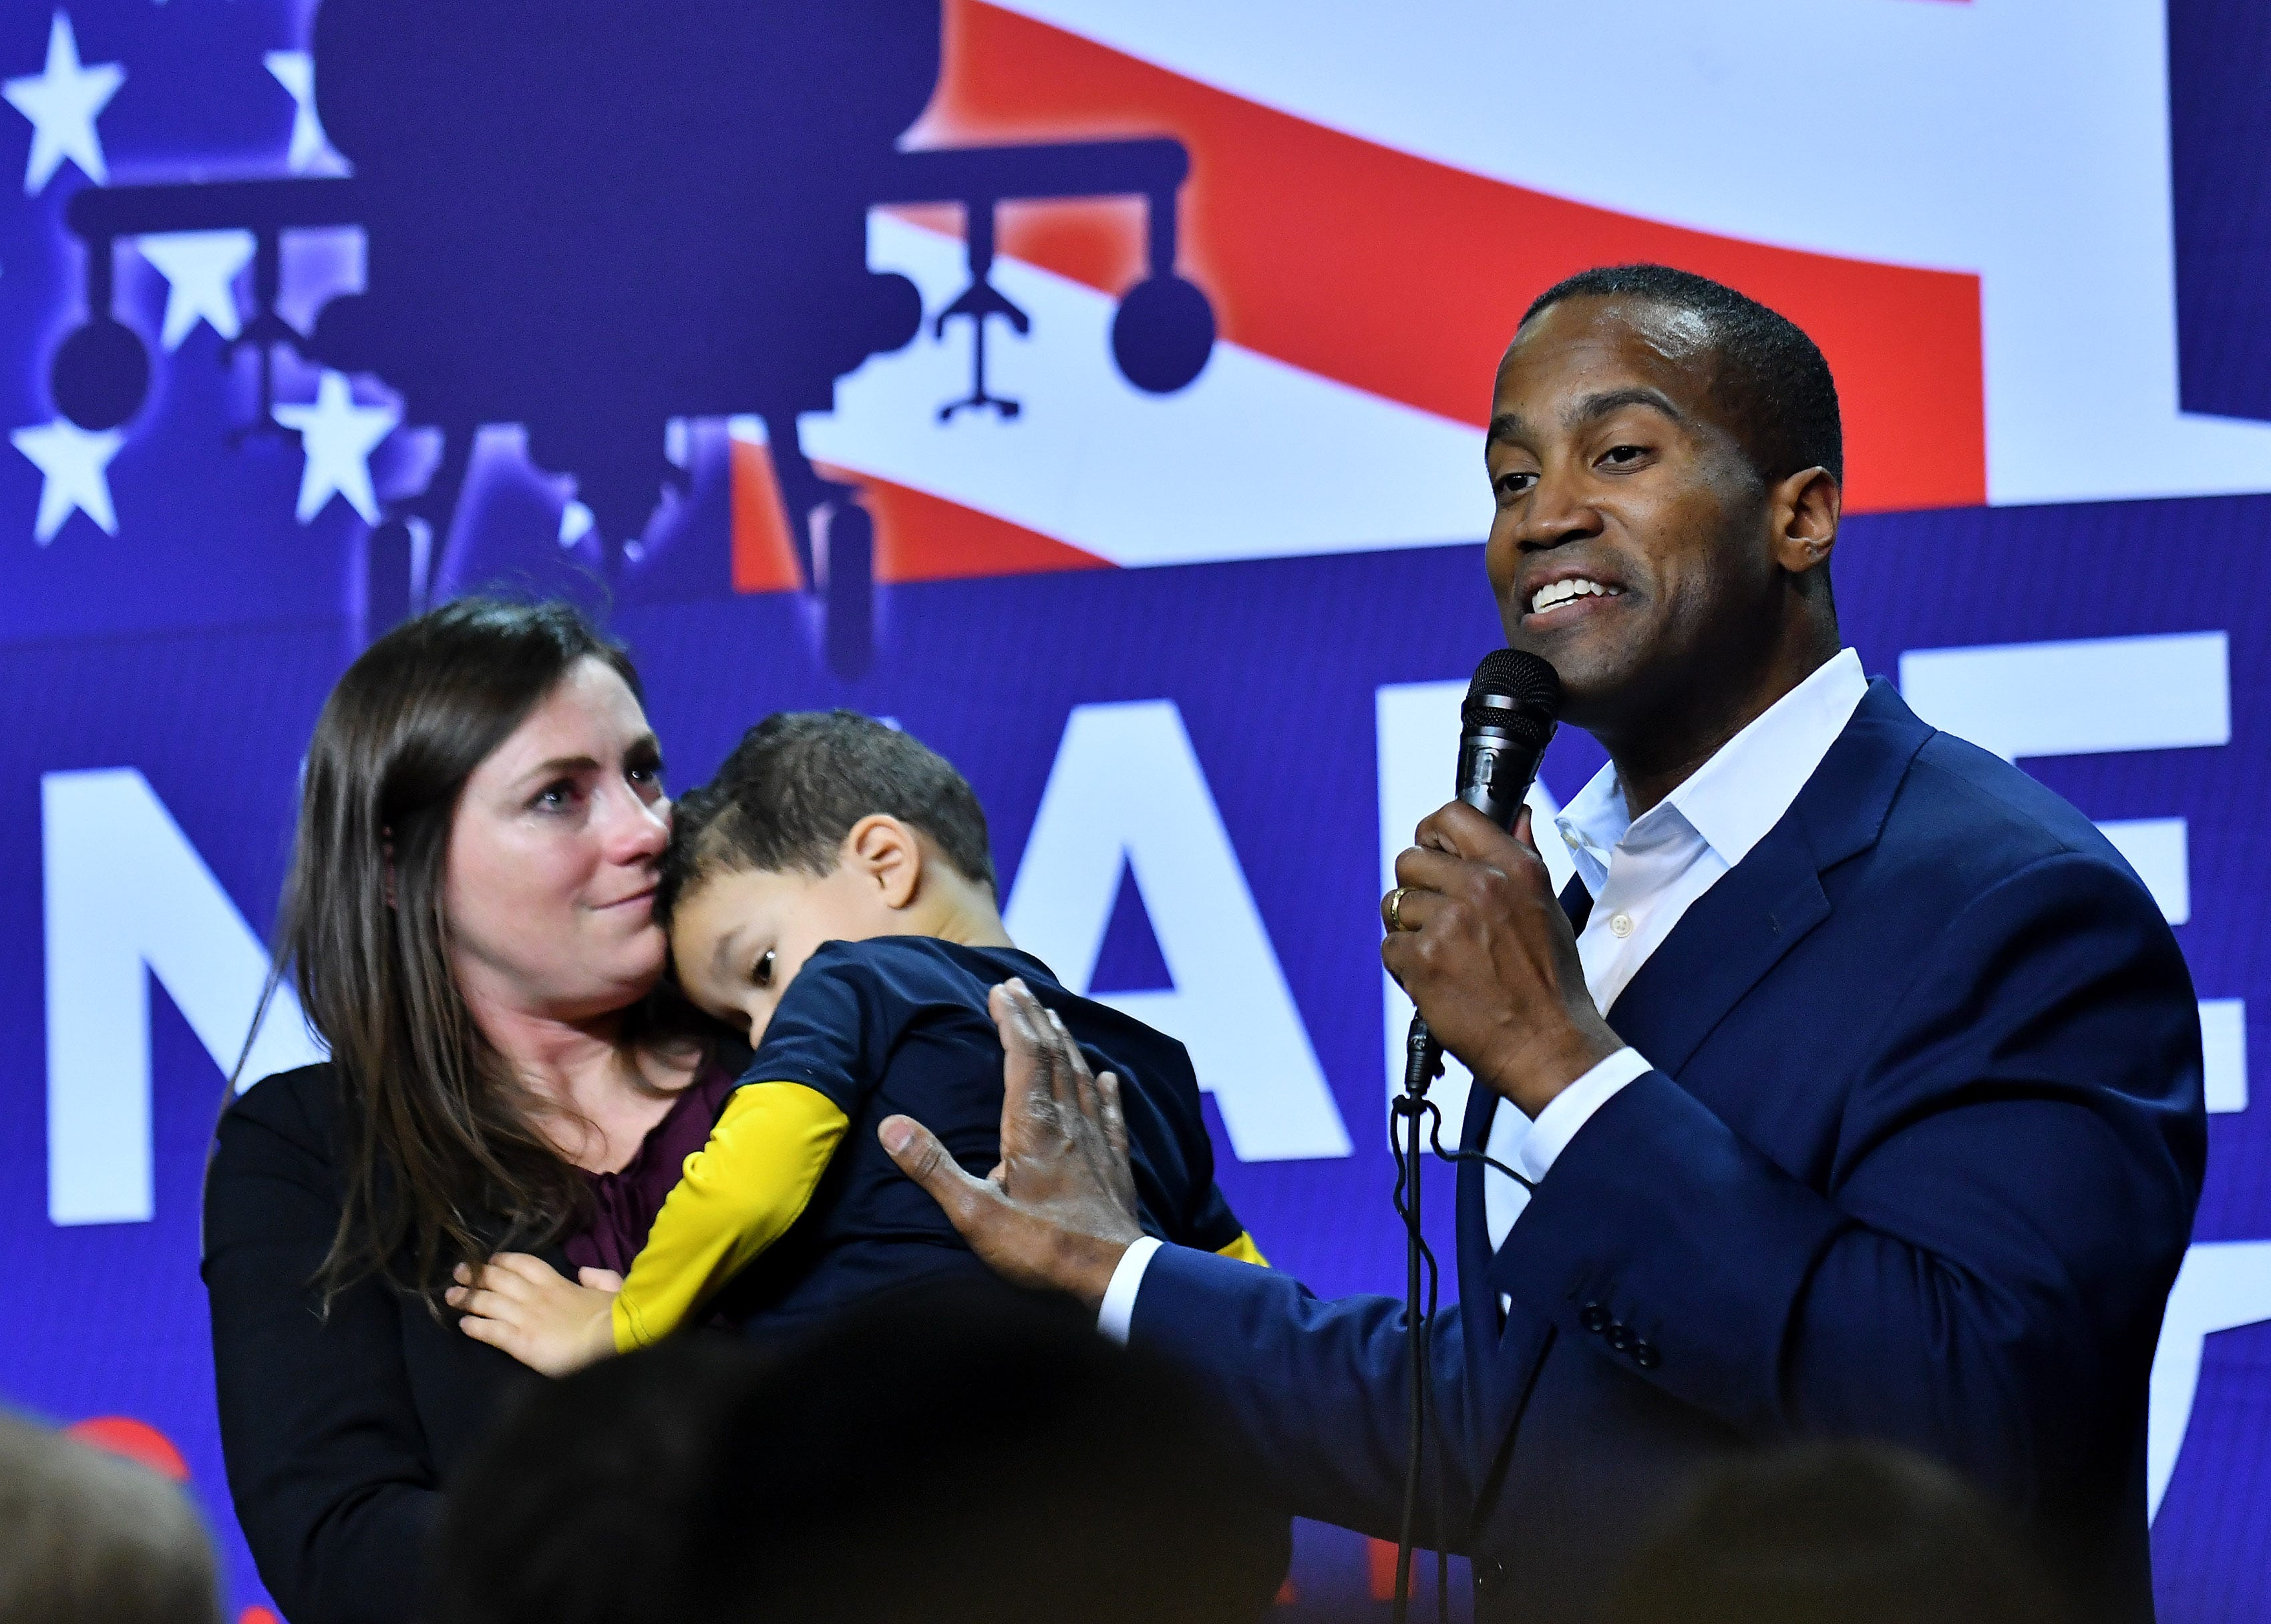 With wife Elizabeth at his side, Republican U.S. Senate candidate John James thanks his supporters, concedes the race and says he will enjoy having more time with his family. He spoke at his election night party  at James Group International in Detroit.